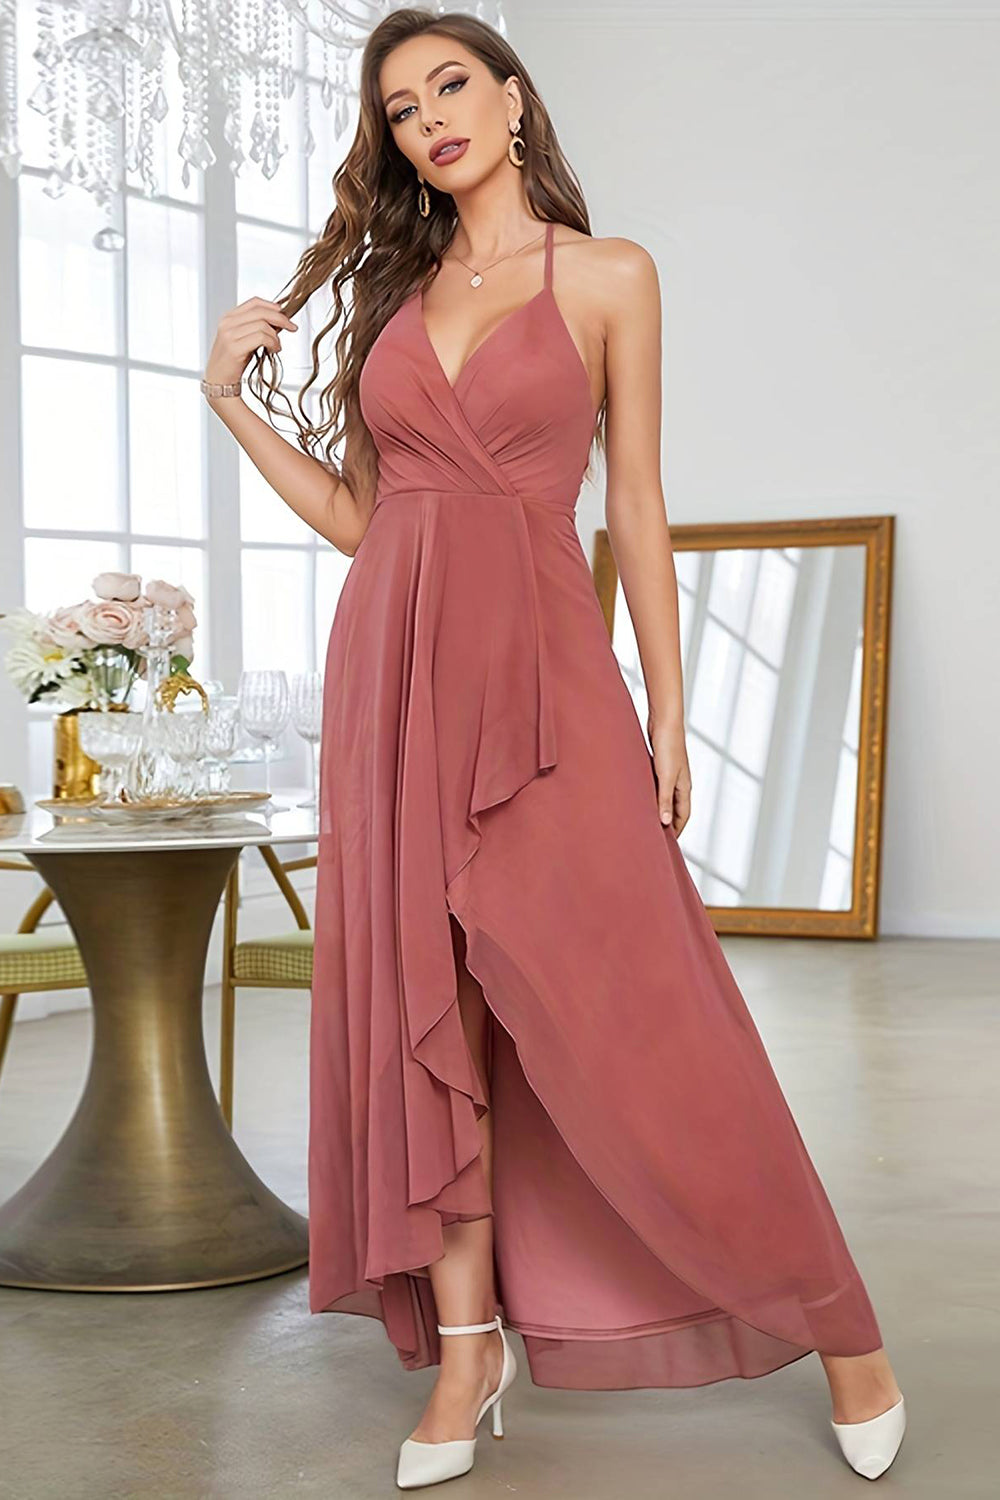 Coral A-Line Asymmetrical Halter Prom Dress With Sleeveless